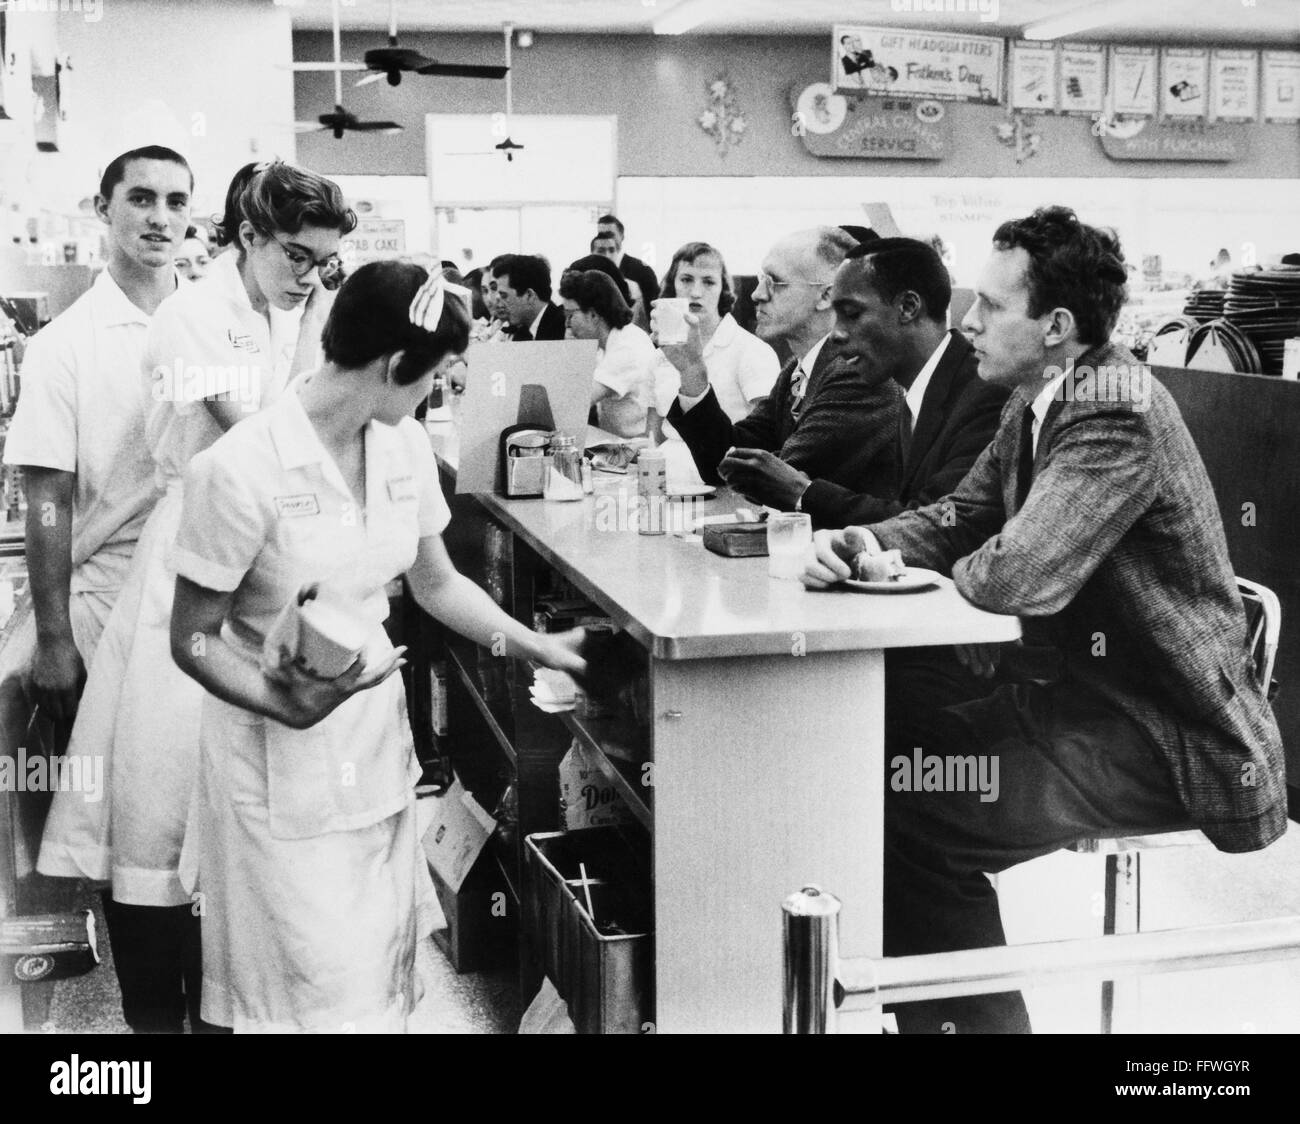 LUNCH COUNTER SIT-IN, 1960. /nLunch counter employees at a Peoples Drug store in Arlington, Virginia, preparing to close early while black and white customers stage a sit-in demonstration, 9 June 1960. Stock Photo